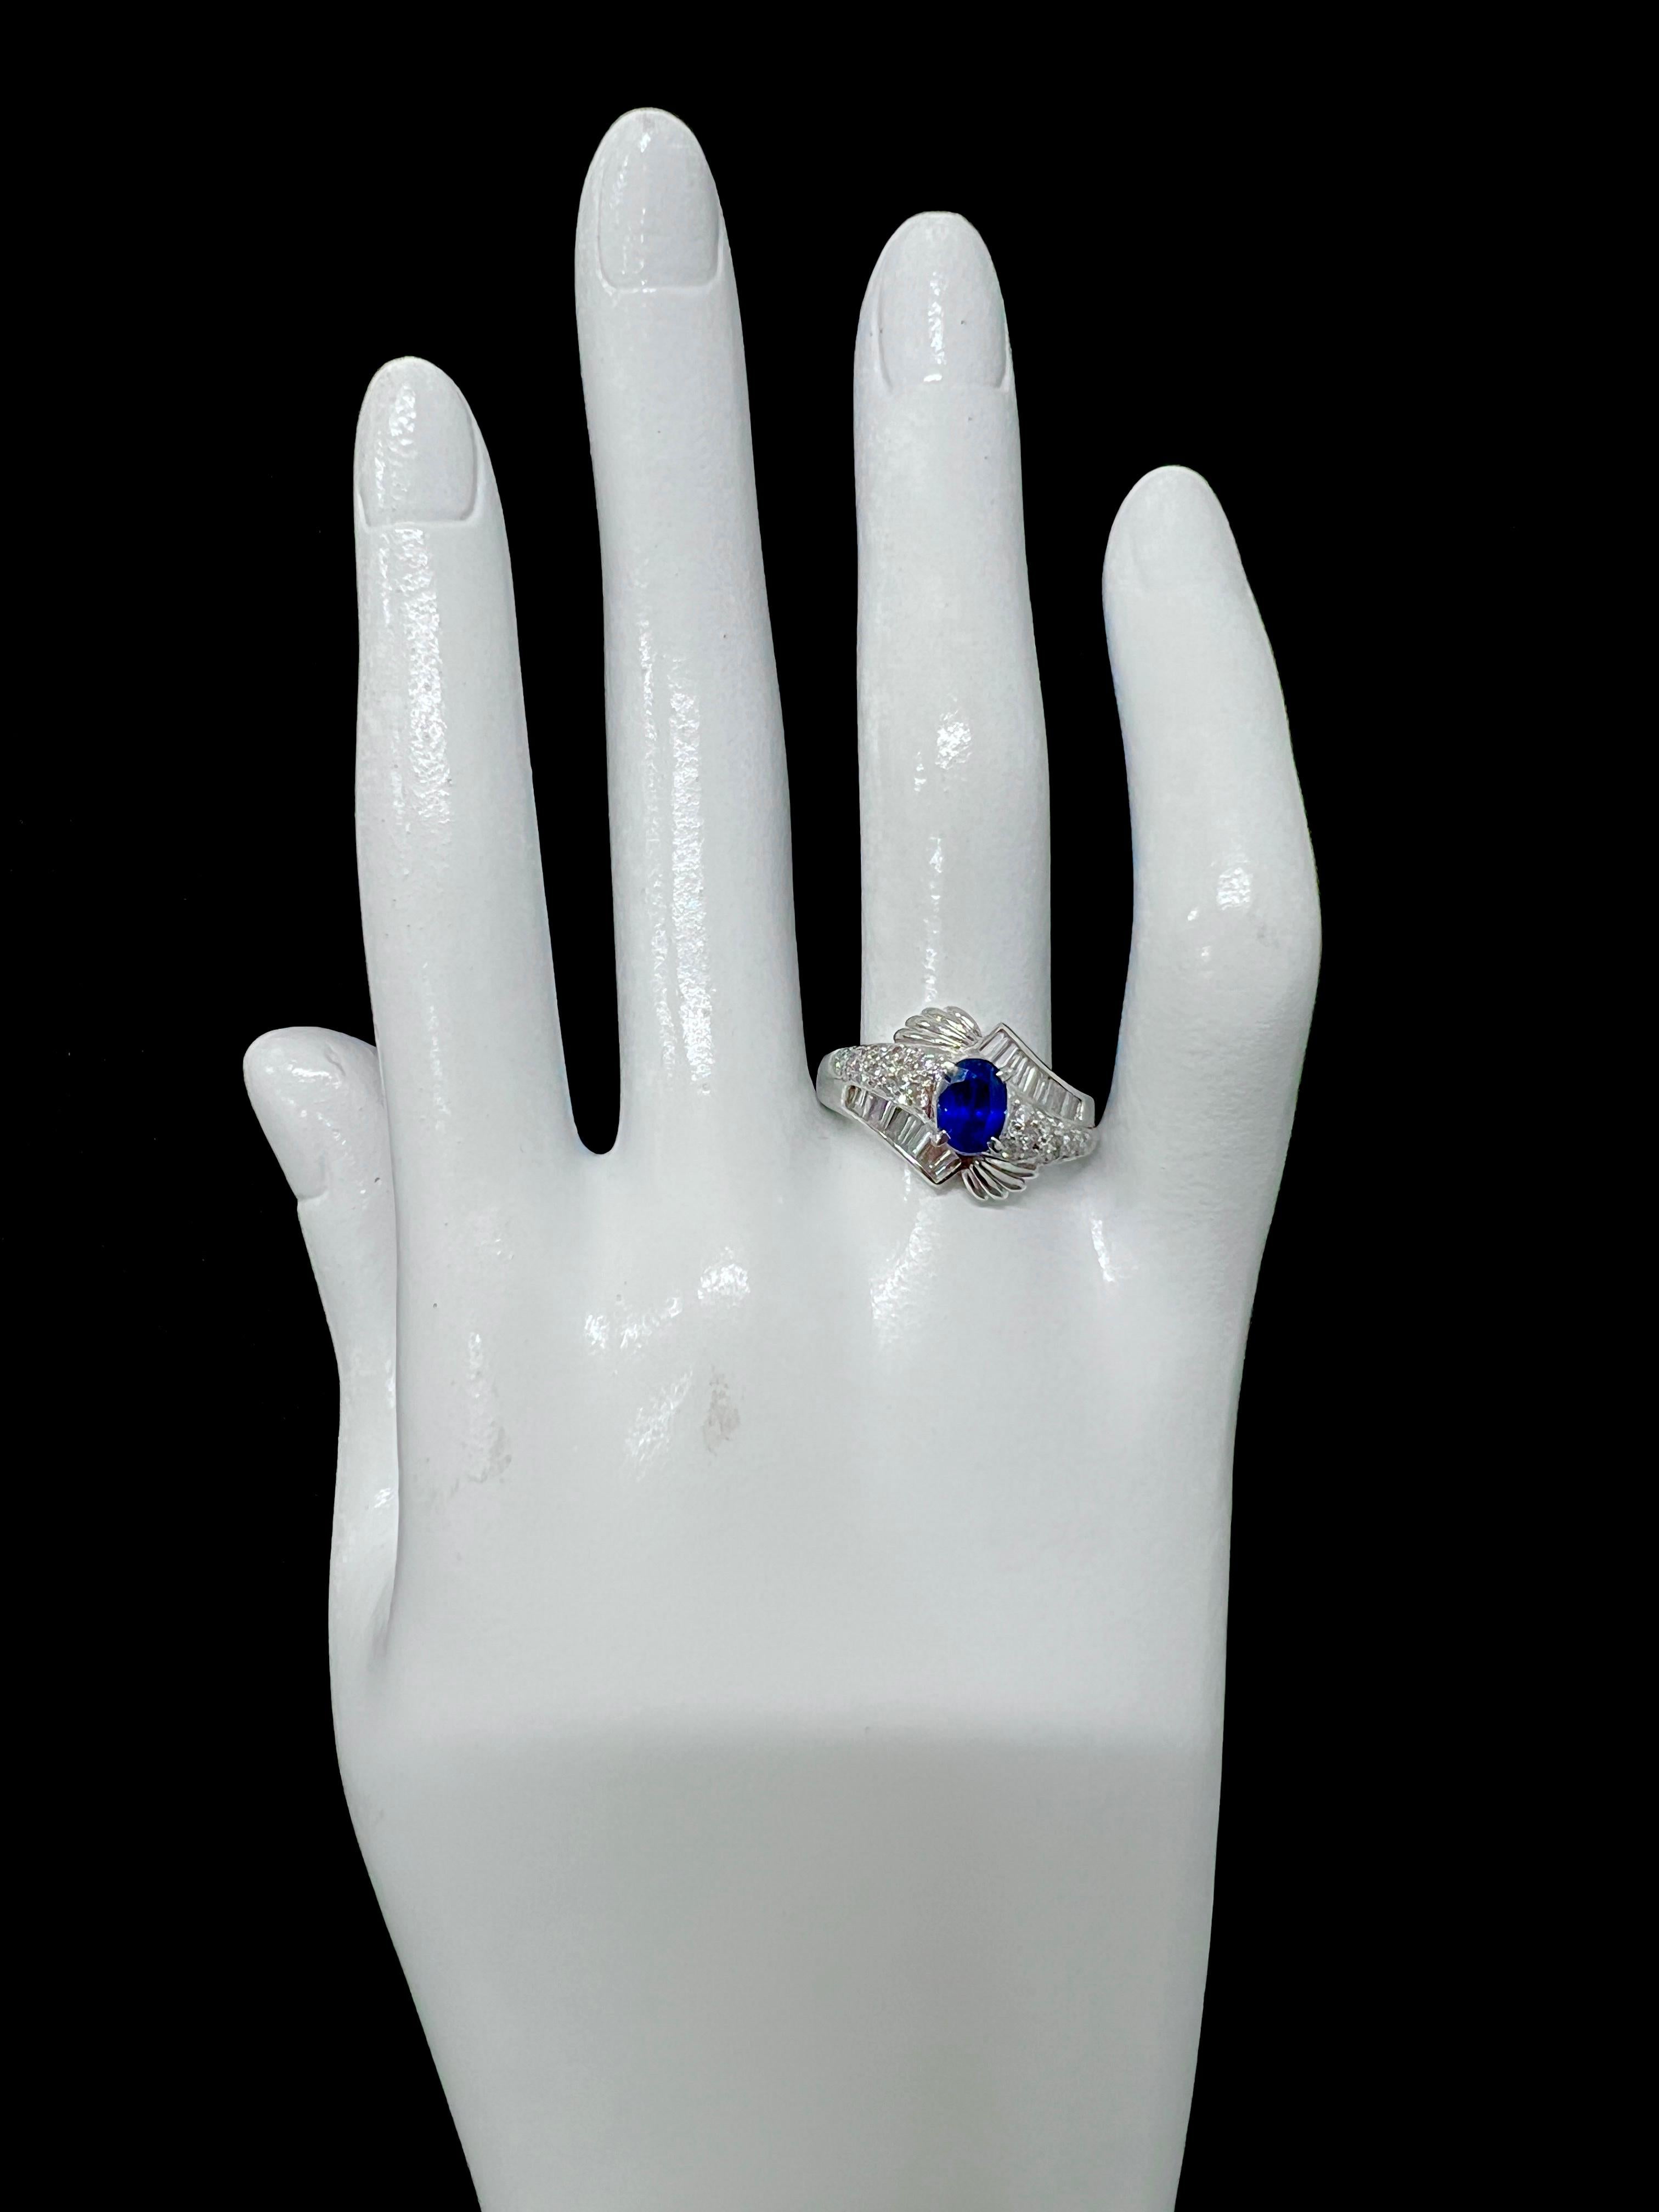 Vintage Platinum Ring featuring a 1.05 Carat Blue Sapphire and Diamonds For Sale 1